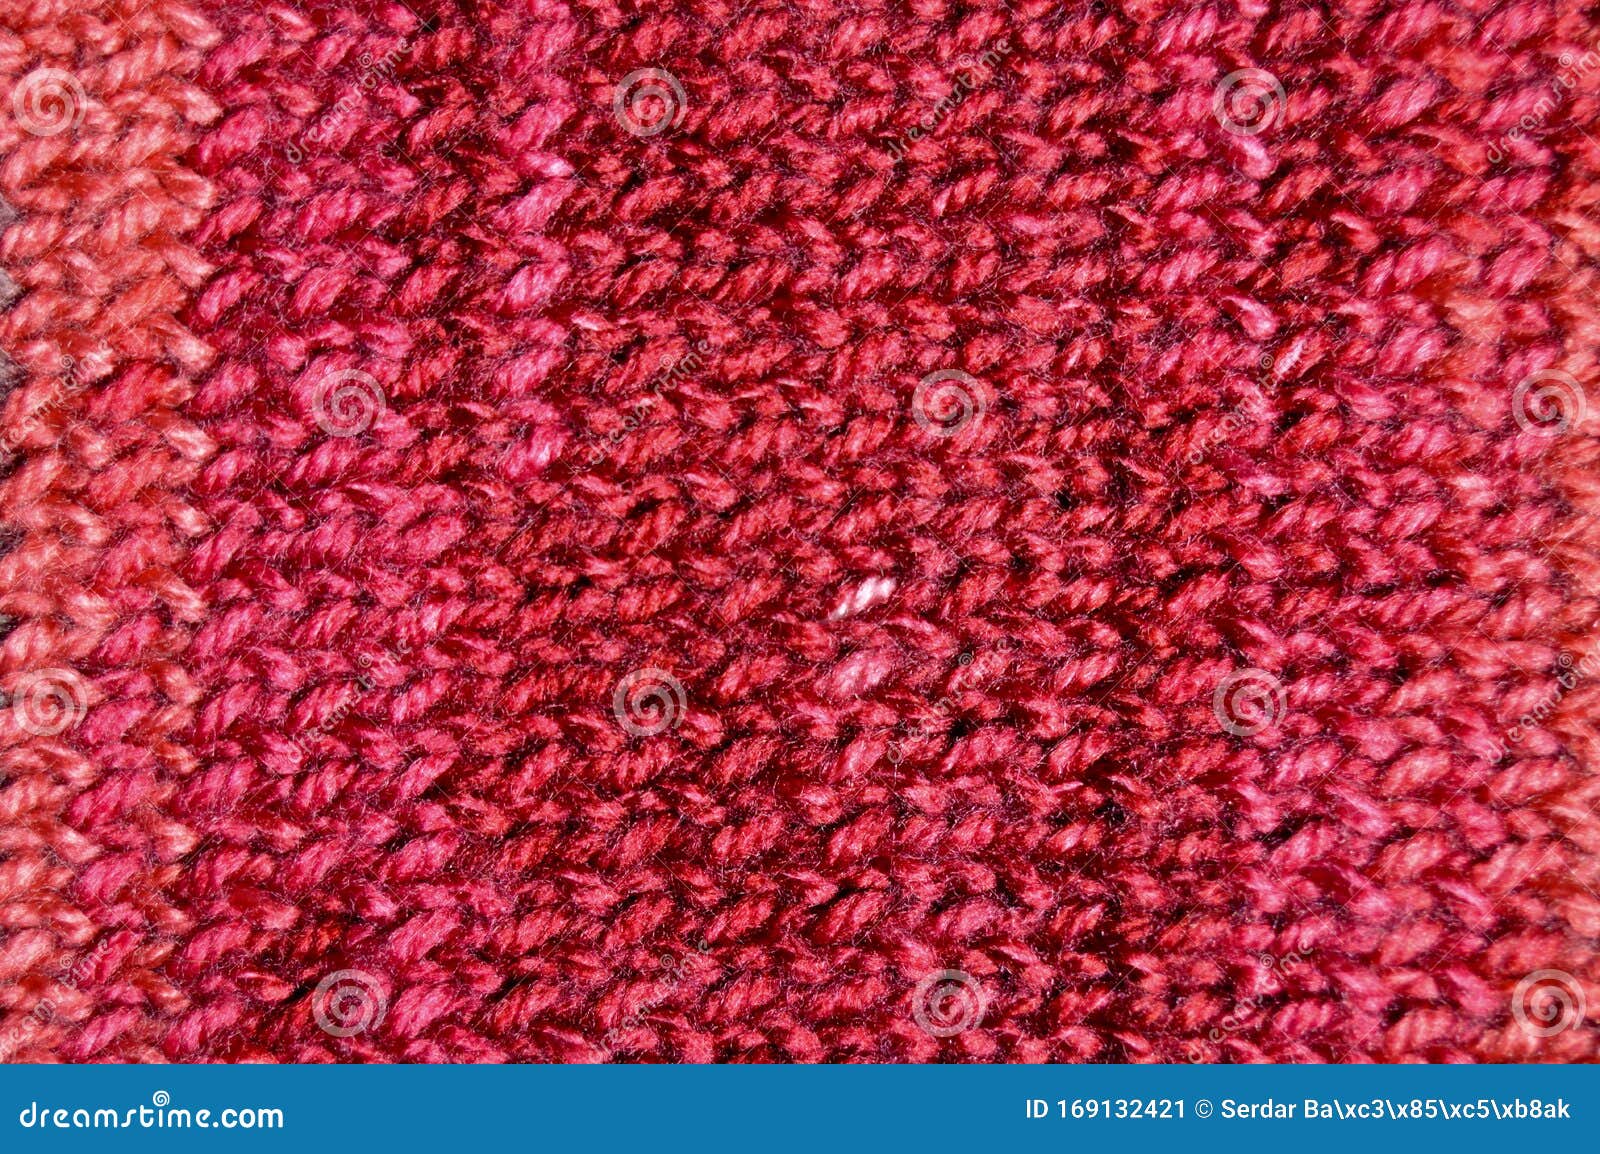 Handmade Knitted Fabric Red Wool Background Texture Stock Image - Image ...